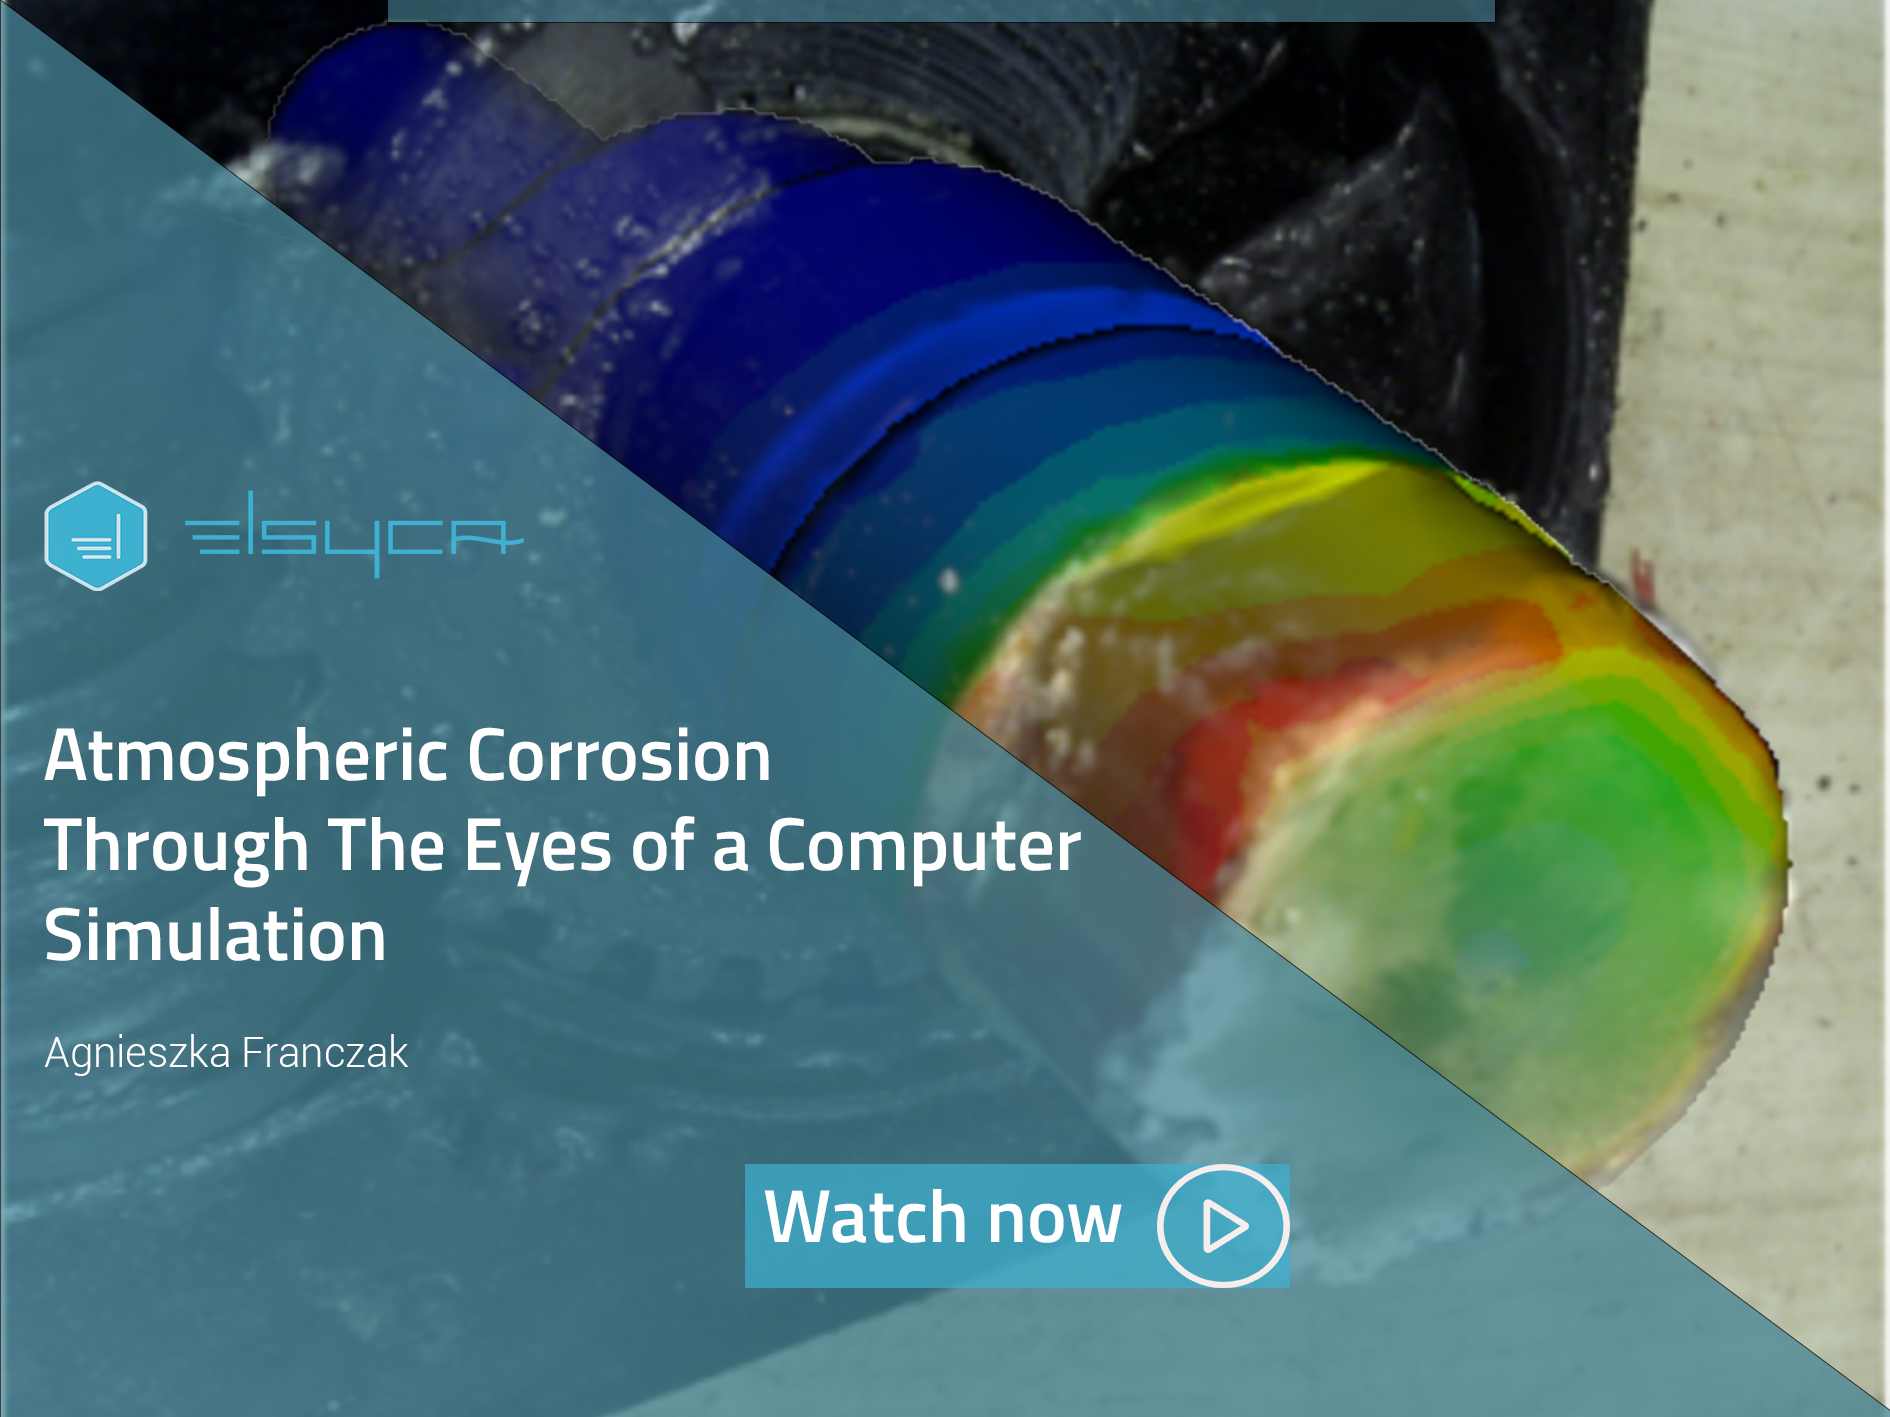 Atmospheric Corrosion Through The Eyes of a Computer Simulation